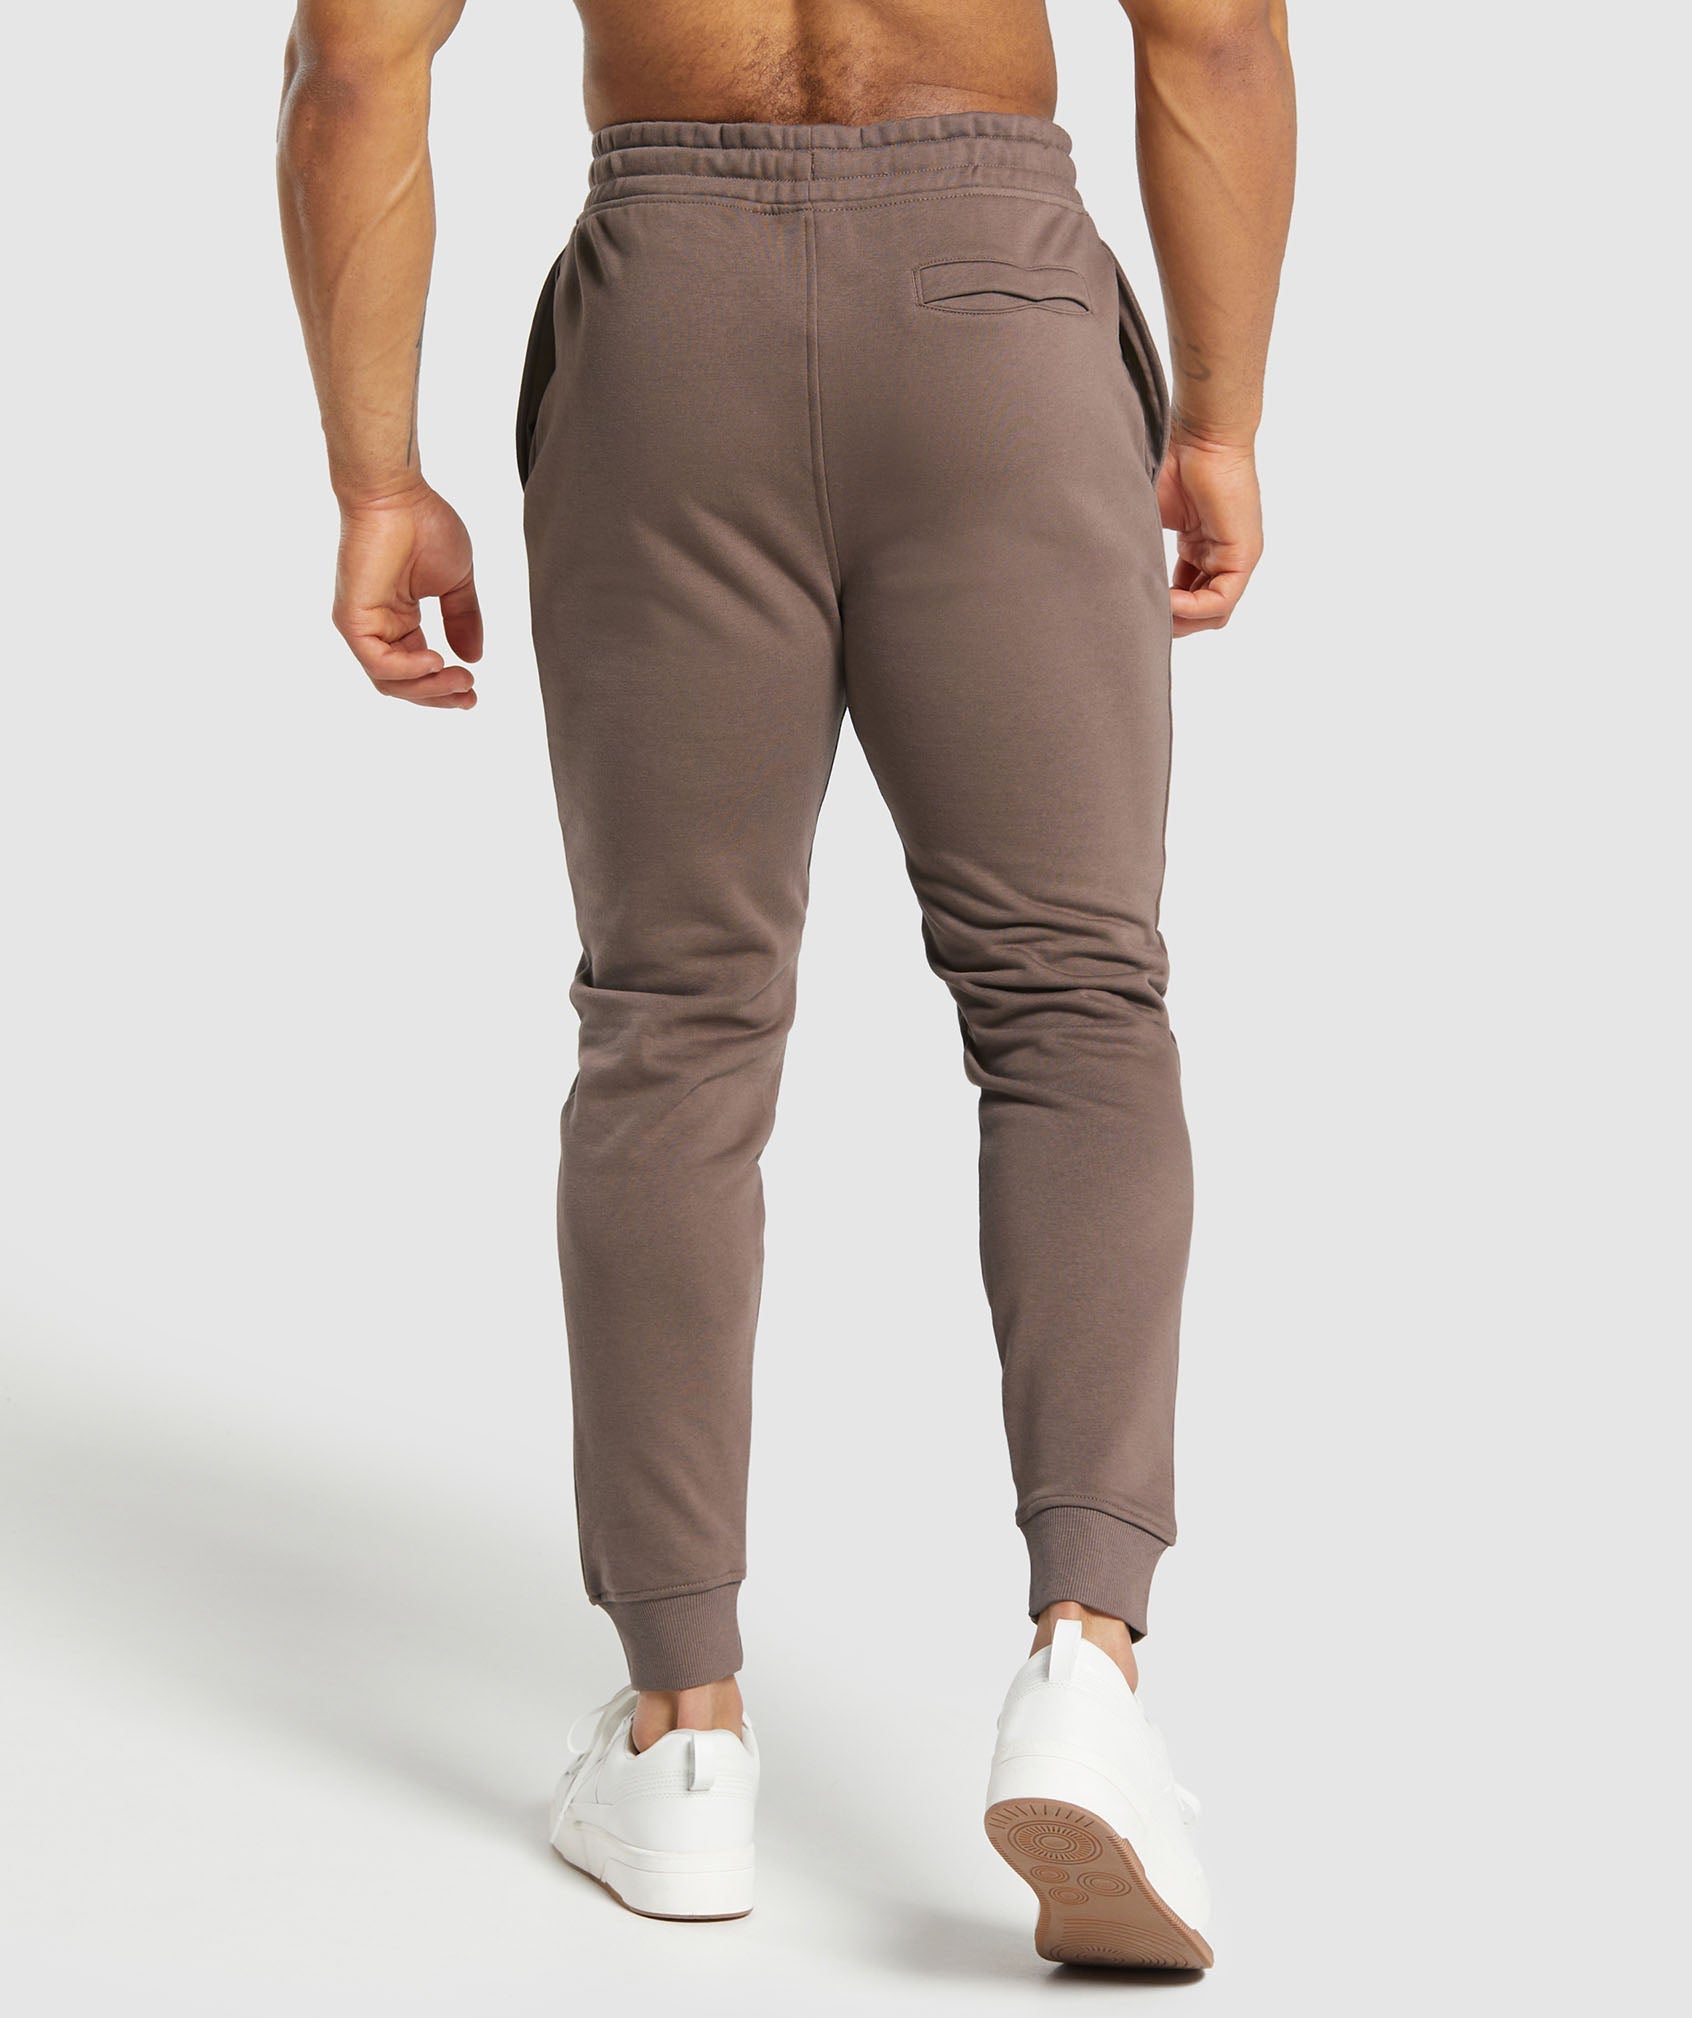 Crest Joggers in Truffle Brown - view 2